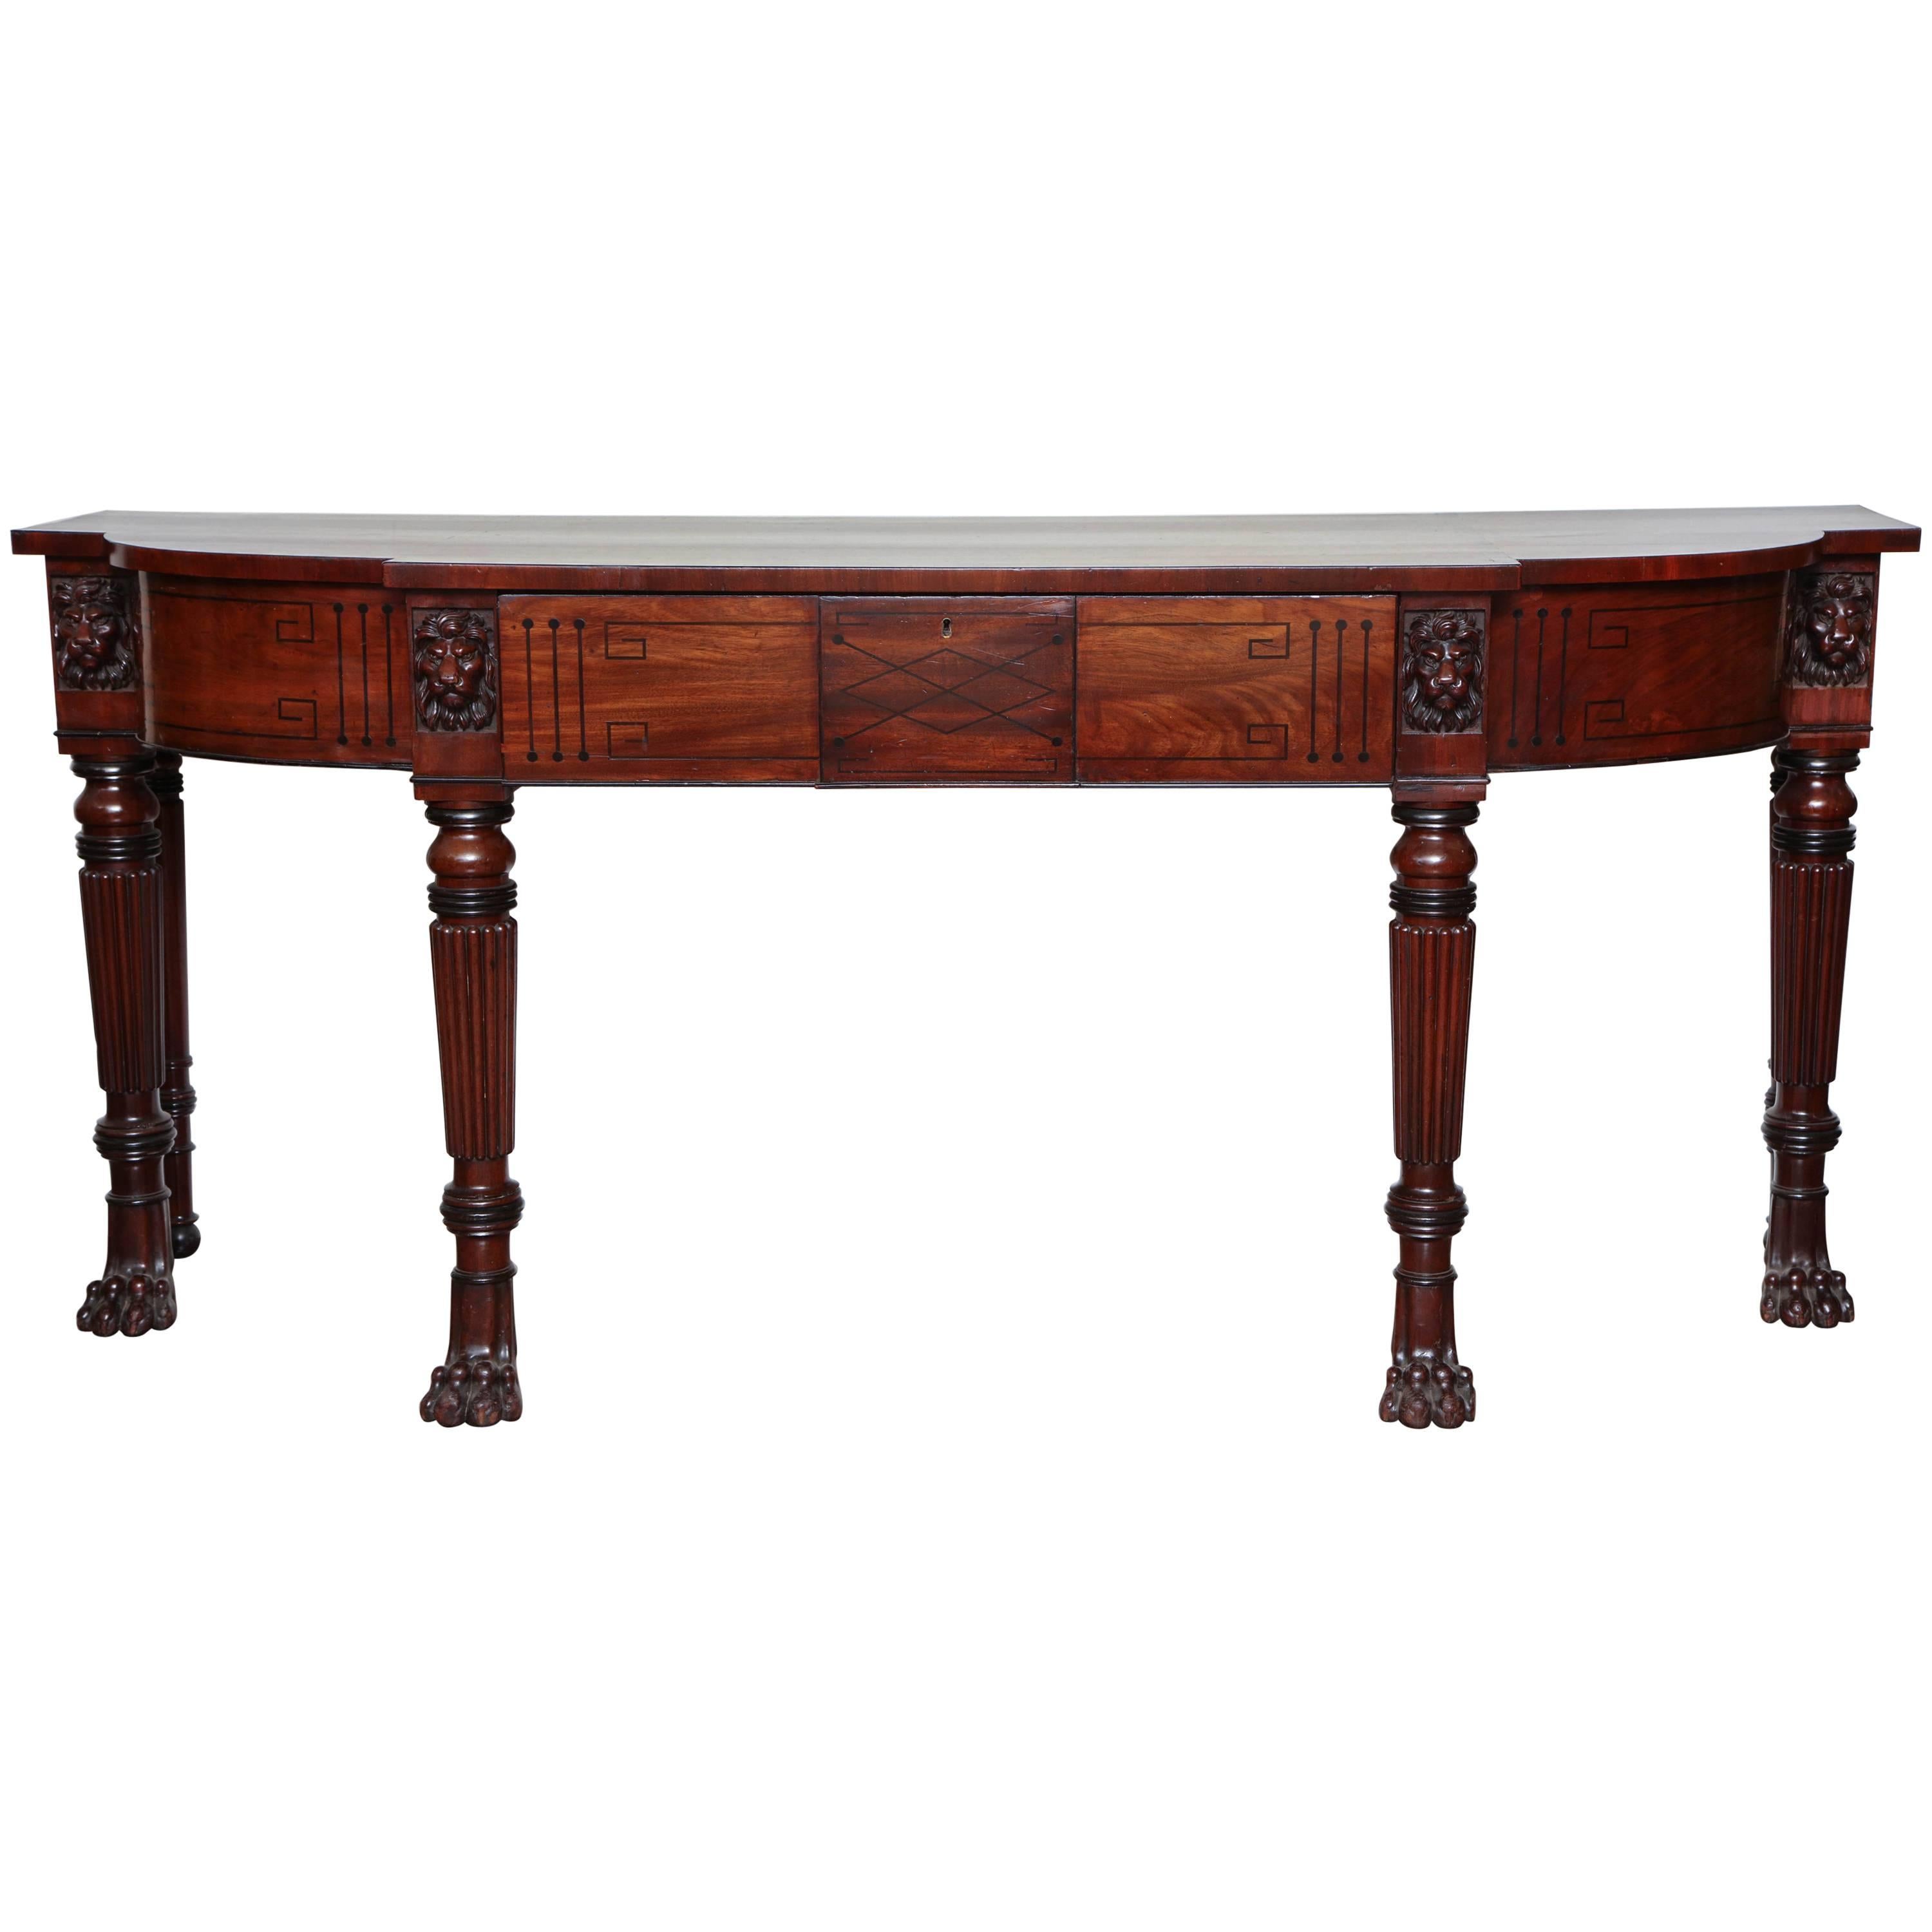 Early 19th Century English Regency, Mahogany Serving Table with Drawer